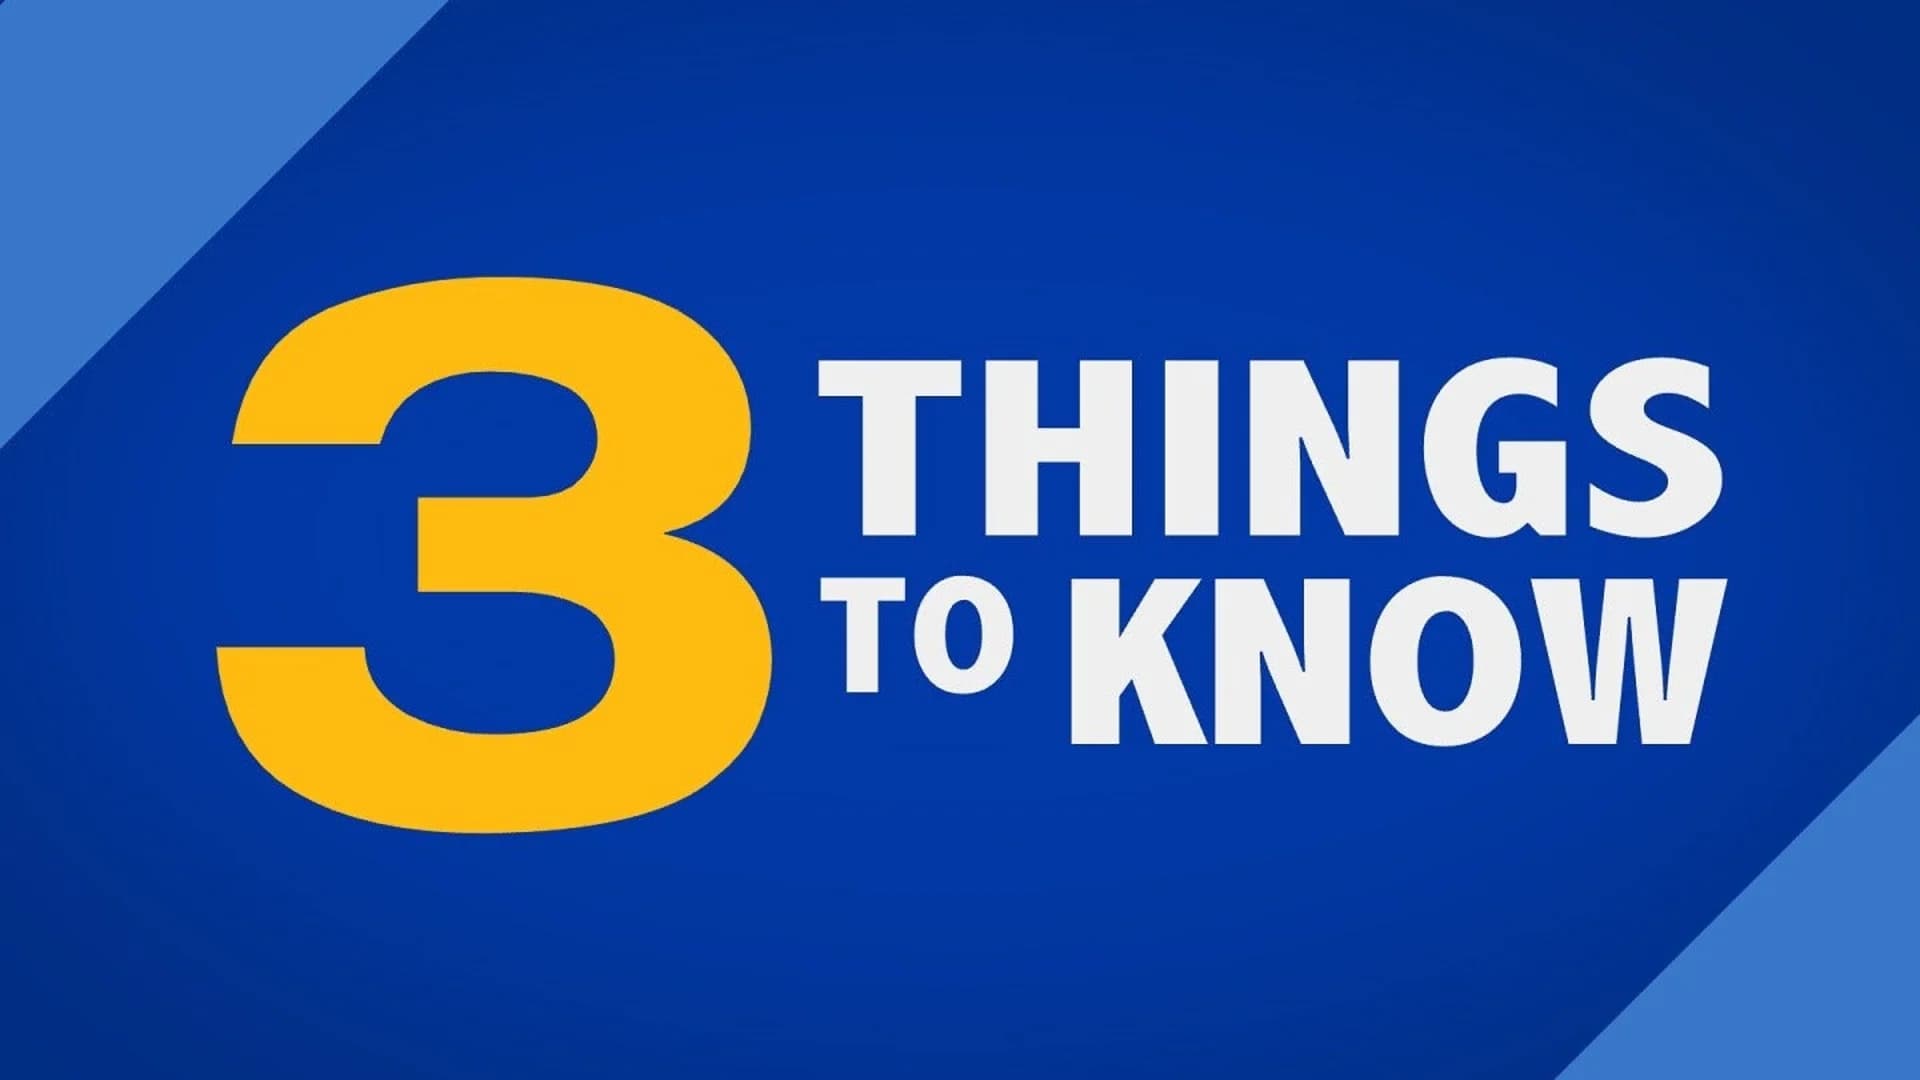 3 Things to Know - June 12, 2018